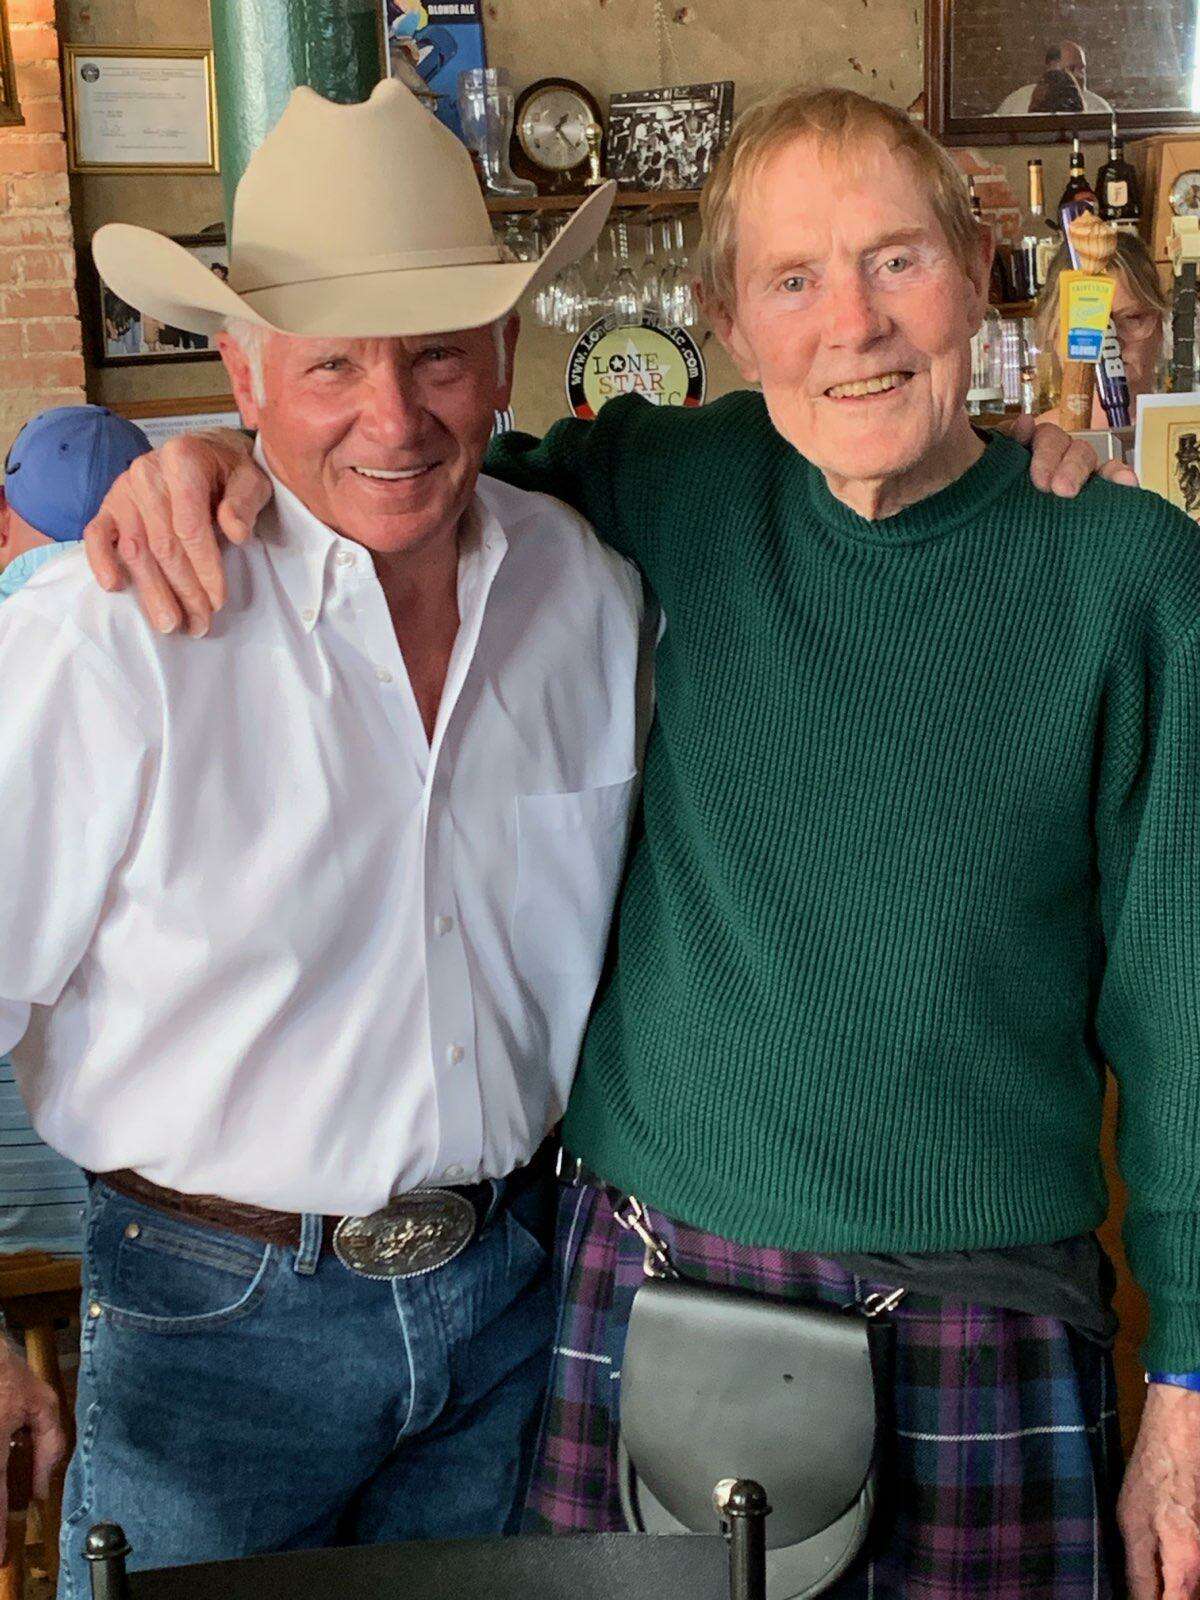 Mike McDougal and Robert Anderson are pictured at Conroe's St. Patrick's Day Walking Parade in 2021. Robert is the brother of David Anderson, one of the founders of the parade. David was the bagpiper who led the parade until his passing in 2017. Robert and his wife drove in from Fort Worth to be at the parade to honor his brother. This year’s parade and party are set for Thursday, March 17, at 5 p.m. at The Corner Pub in downtown Conroe.